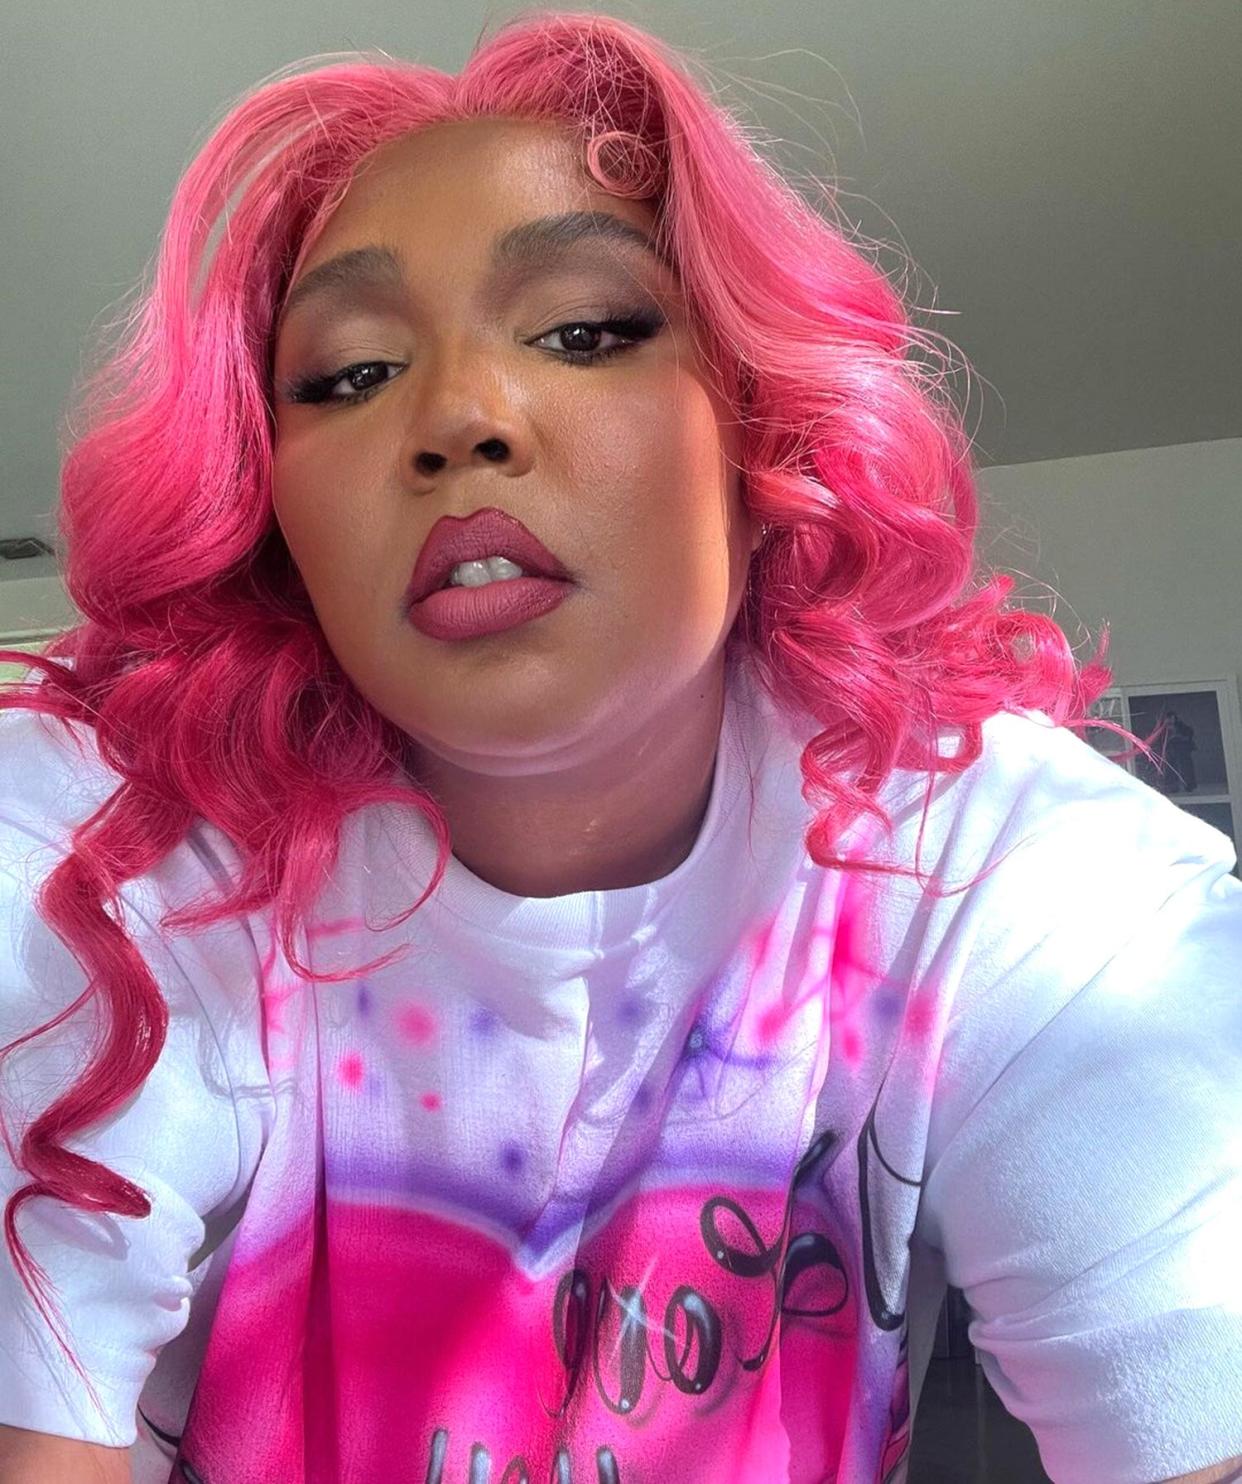 Lizzo Shows Off Her New Hot Pink Locks as she Dances to 'Grrrls'